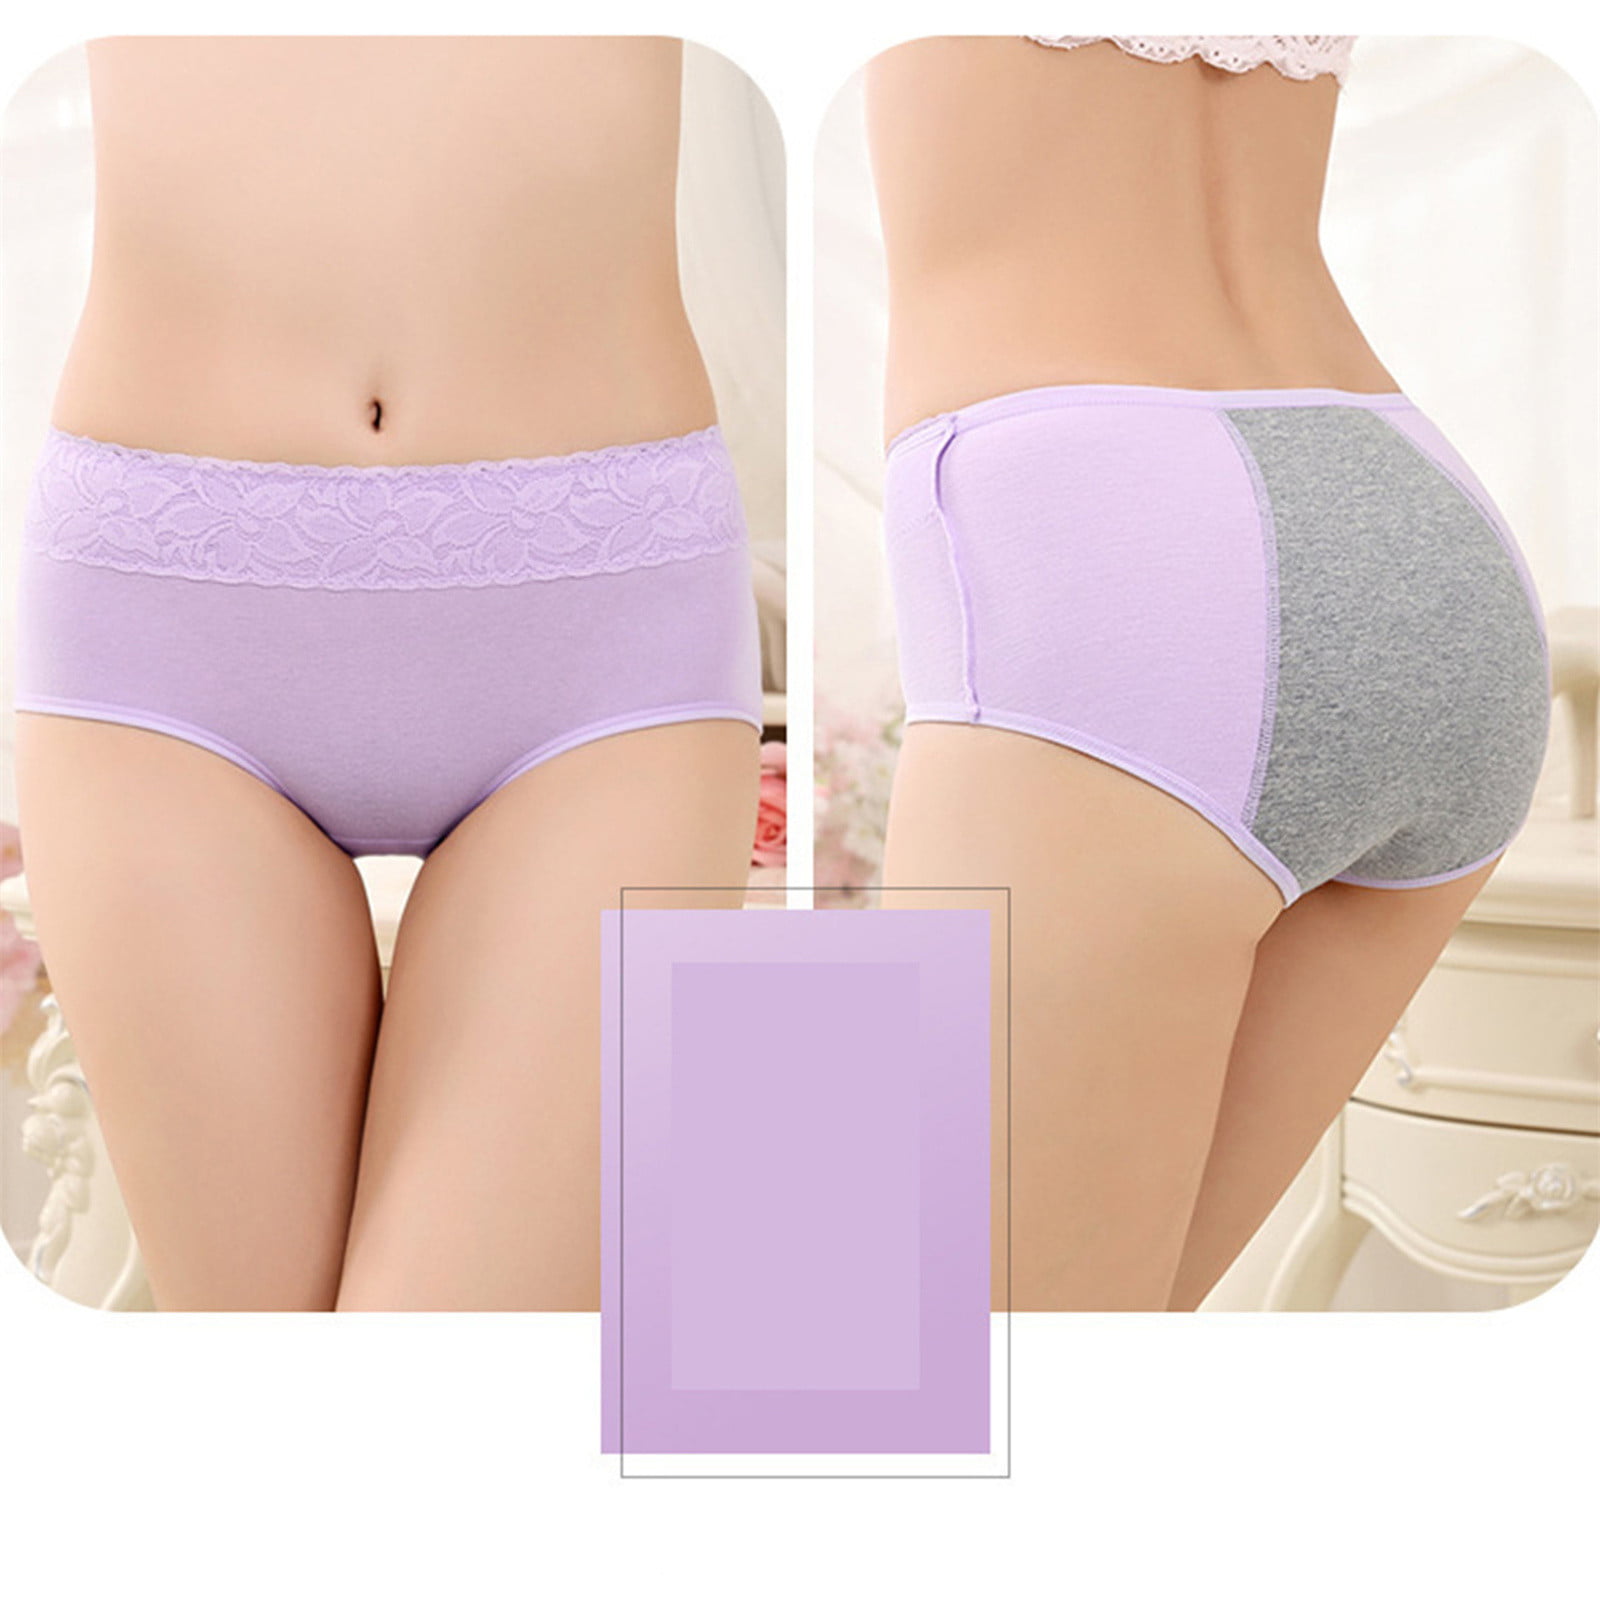 Buy Pescara Plus Size Panty for Women - Pack of 3 - Multicolor (S